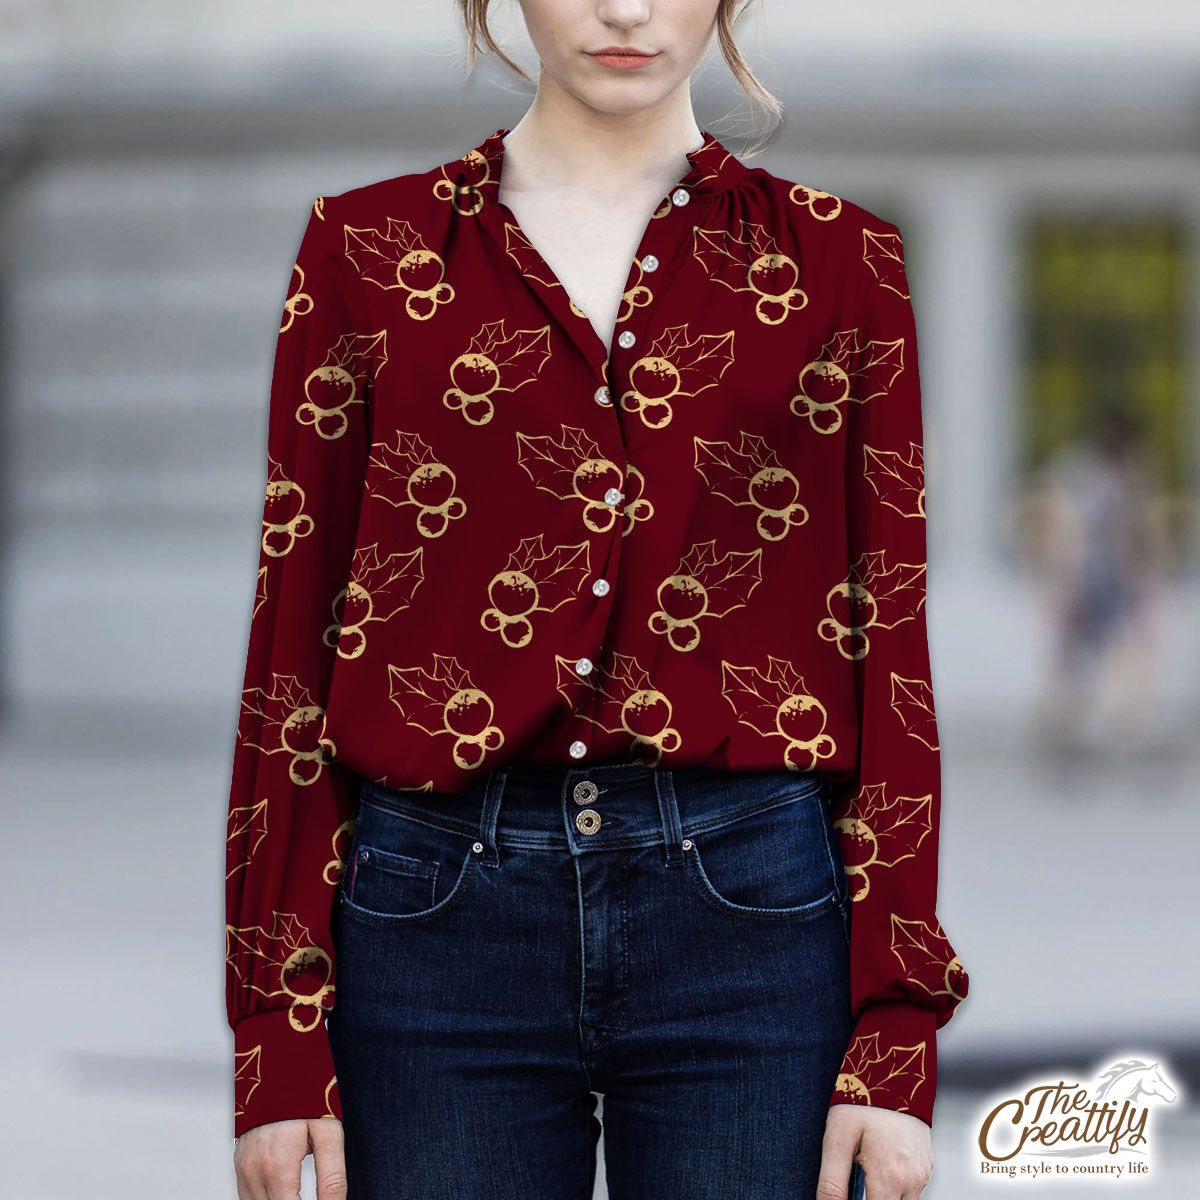 Holly Leaf, Holly Berries, Red Berries V-Neckline Blouses